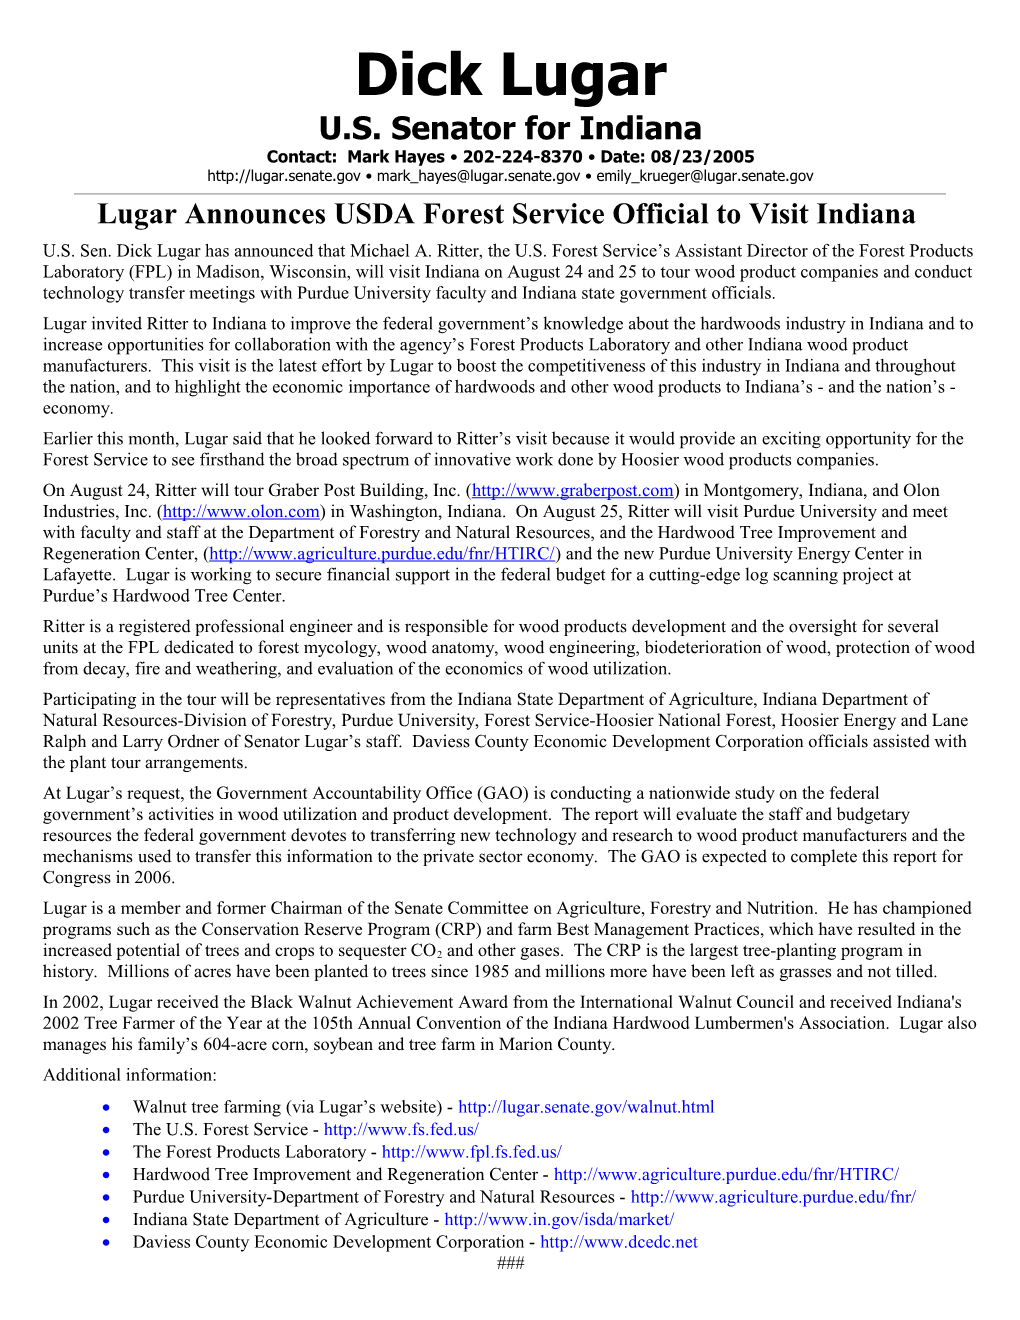 Lugar Announces Usdaforest Service Official to Visit Indiana